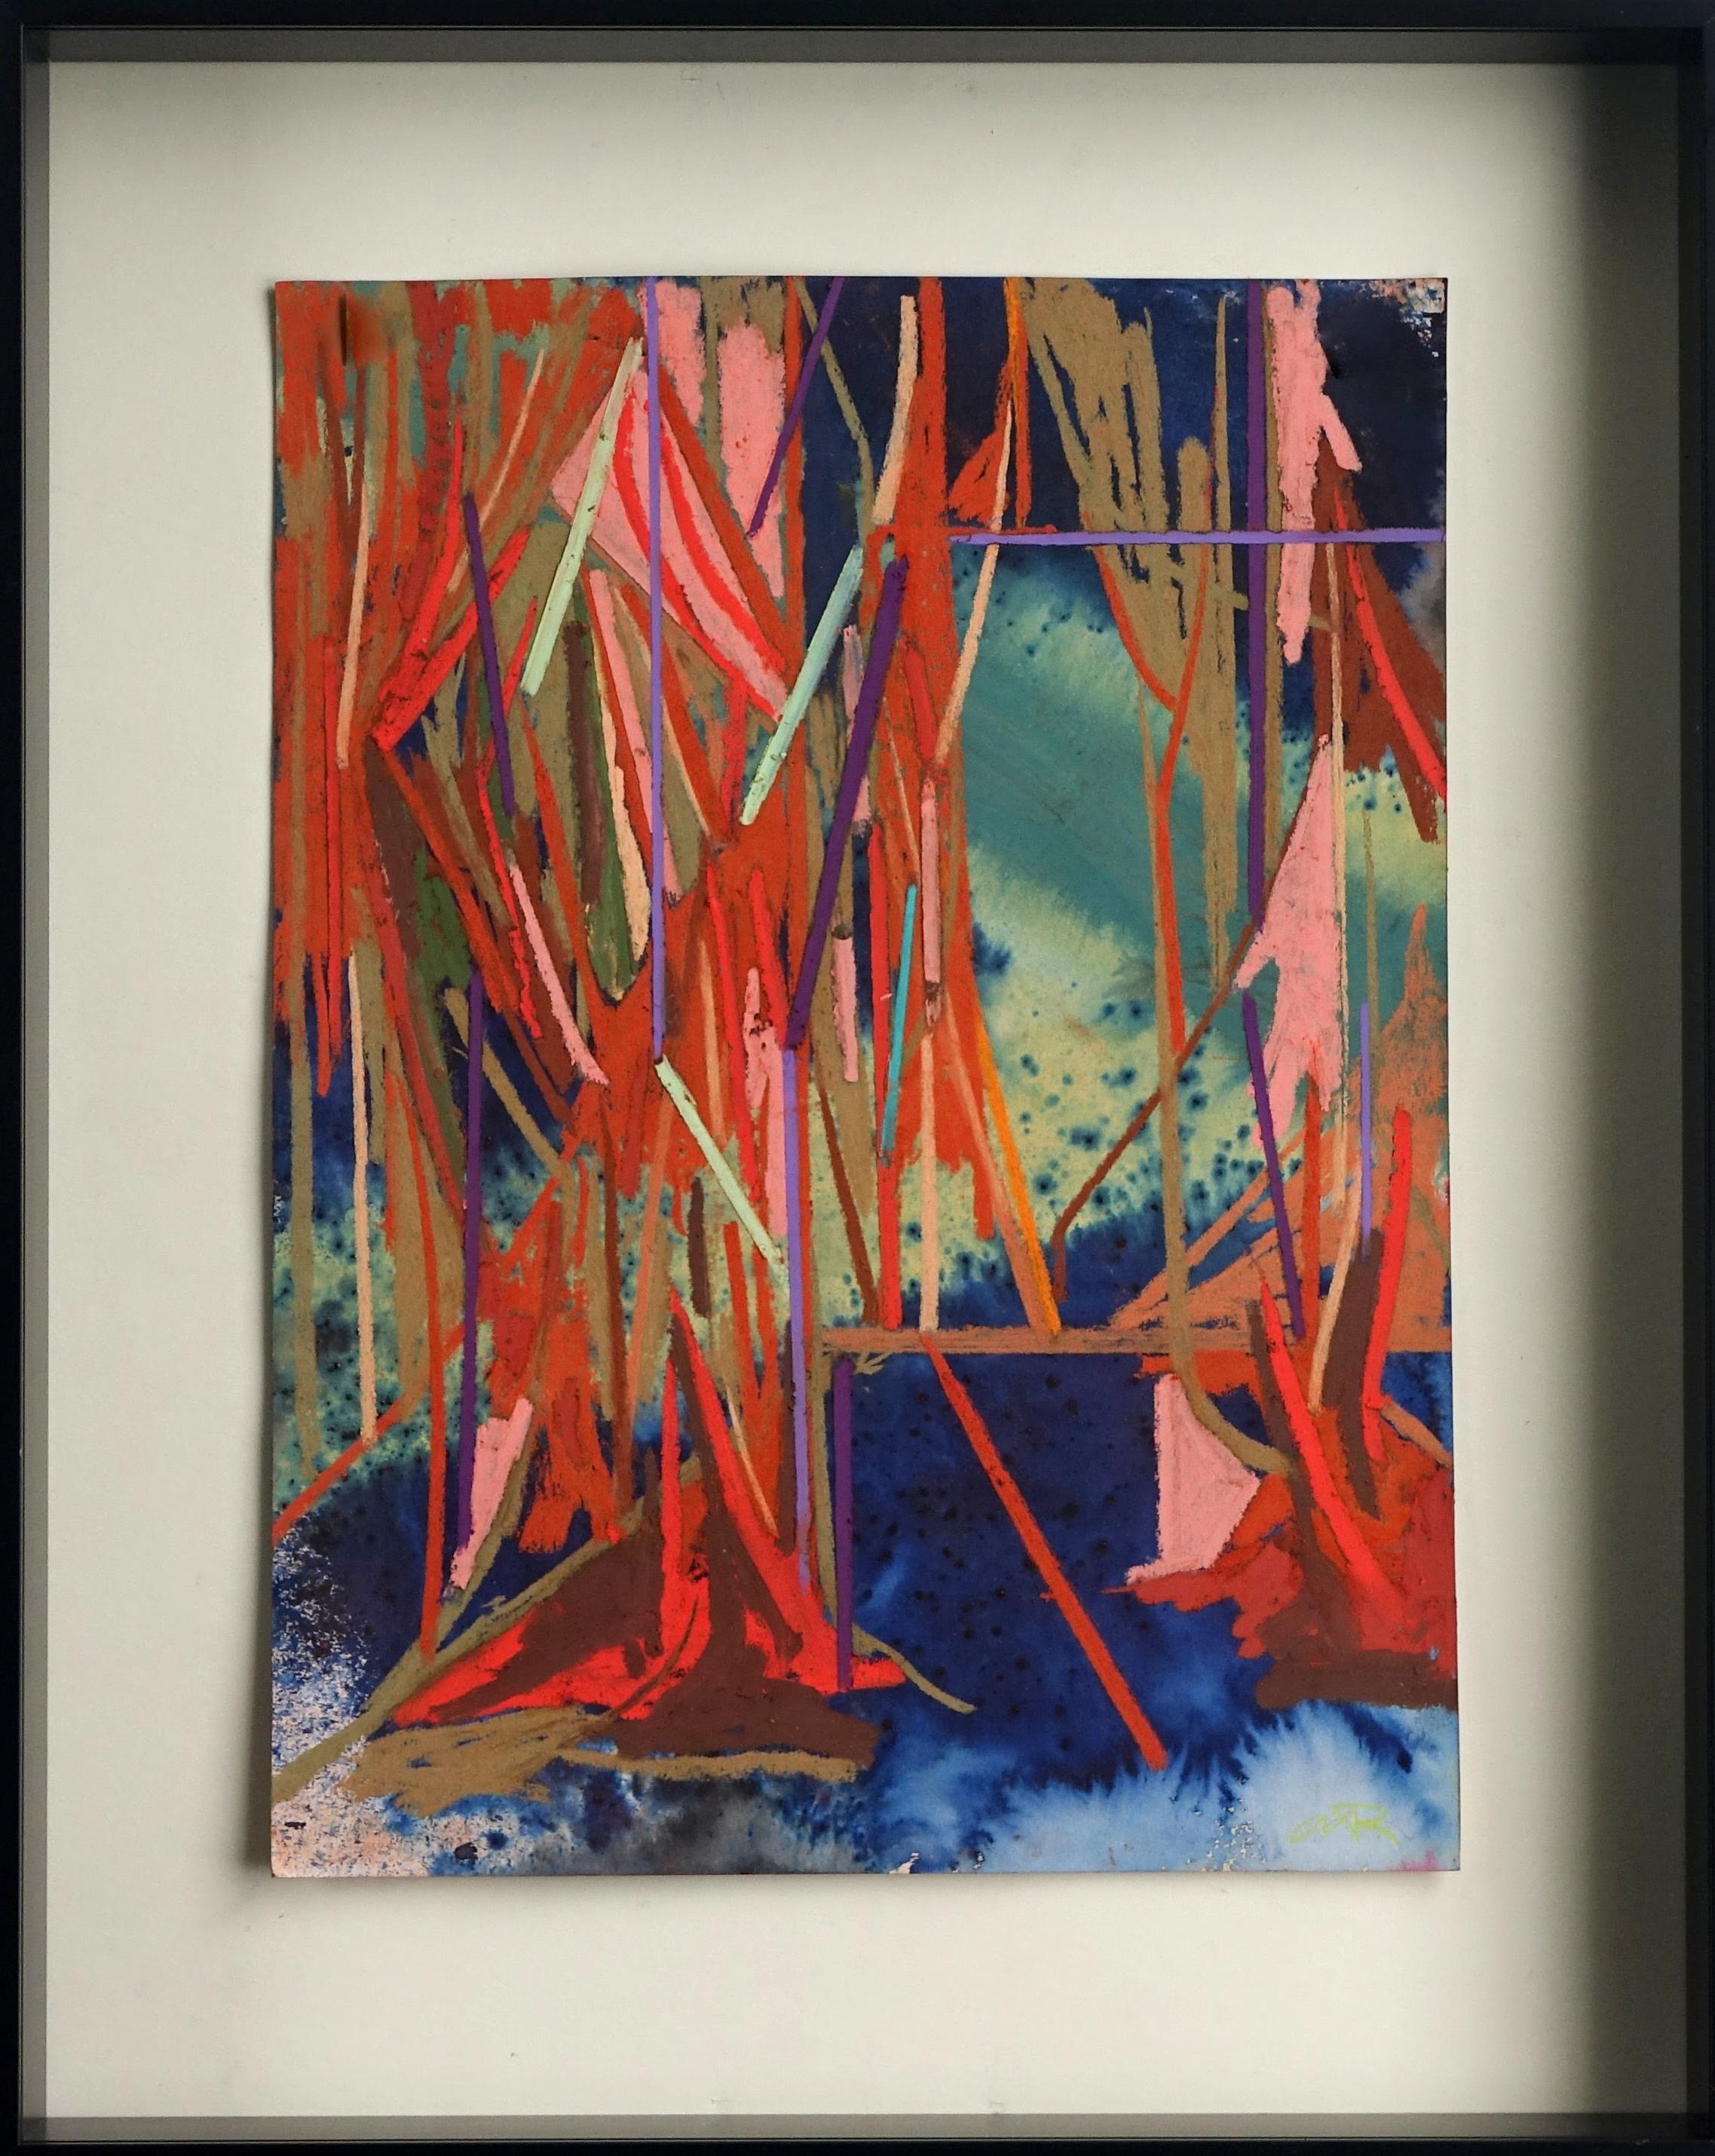 Austin Reavis Figurative Painting - SCAFFOLD (3) - Framed, Linear, Abstract Mixed Media Painting/Drawing on Paper 